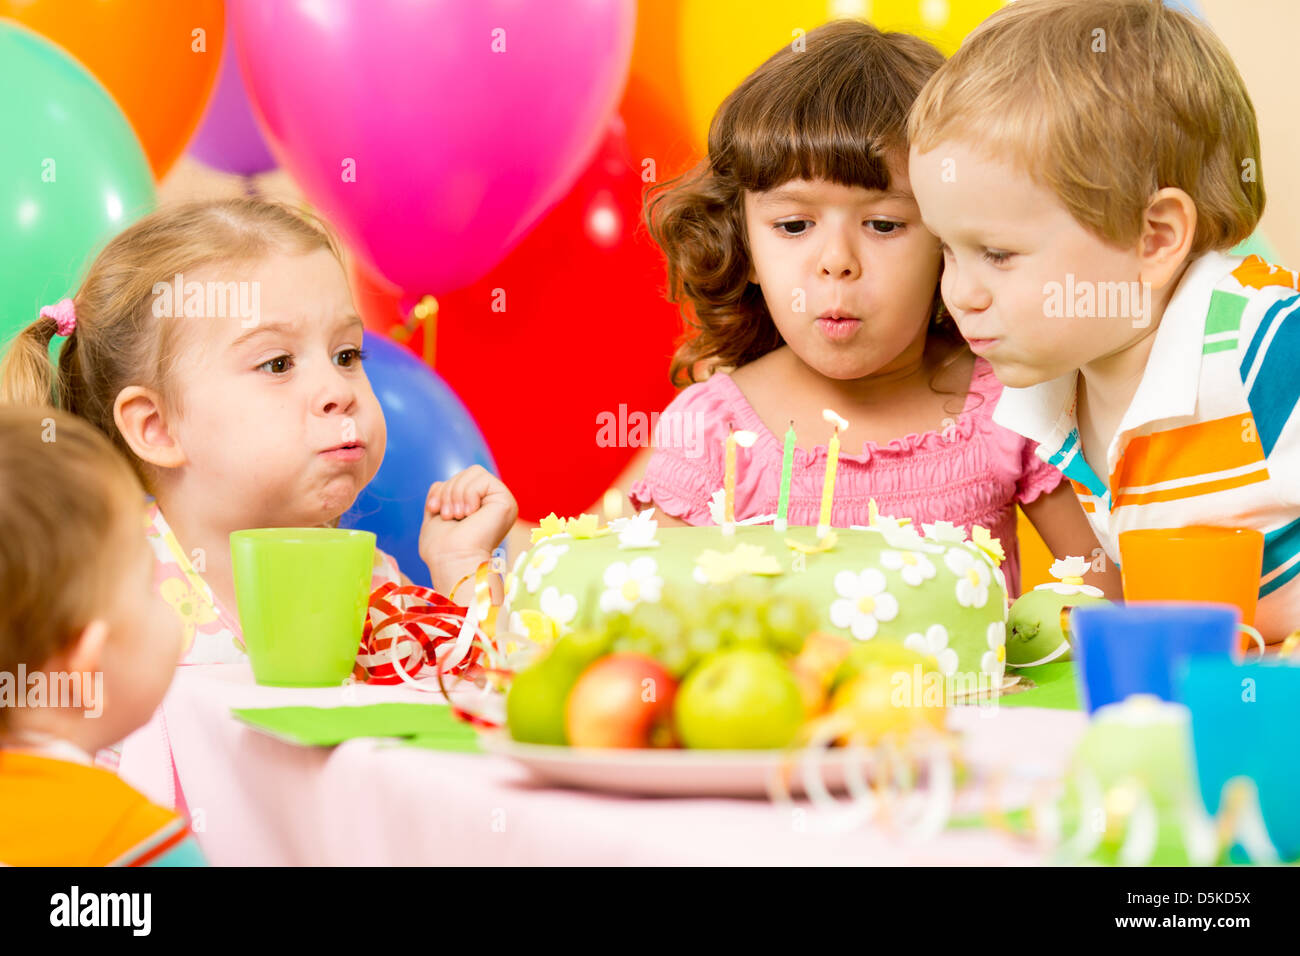 kids celebrating birthday party and blowing candles on cake Stock Photo